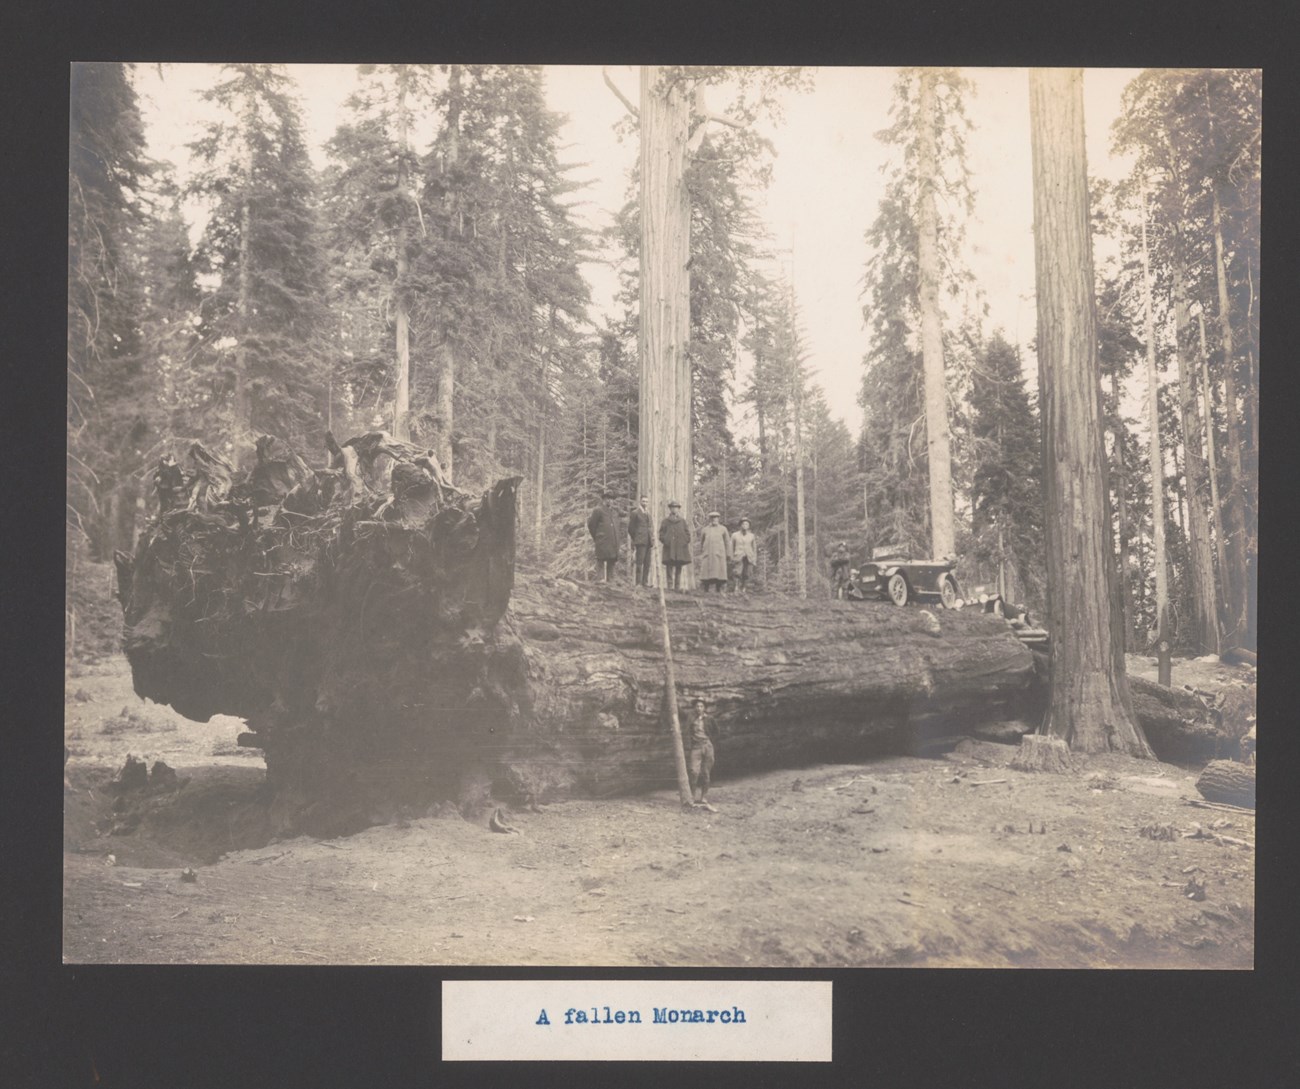 Huge fallen Sequoia with people standing on it and cars diven on it.